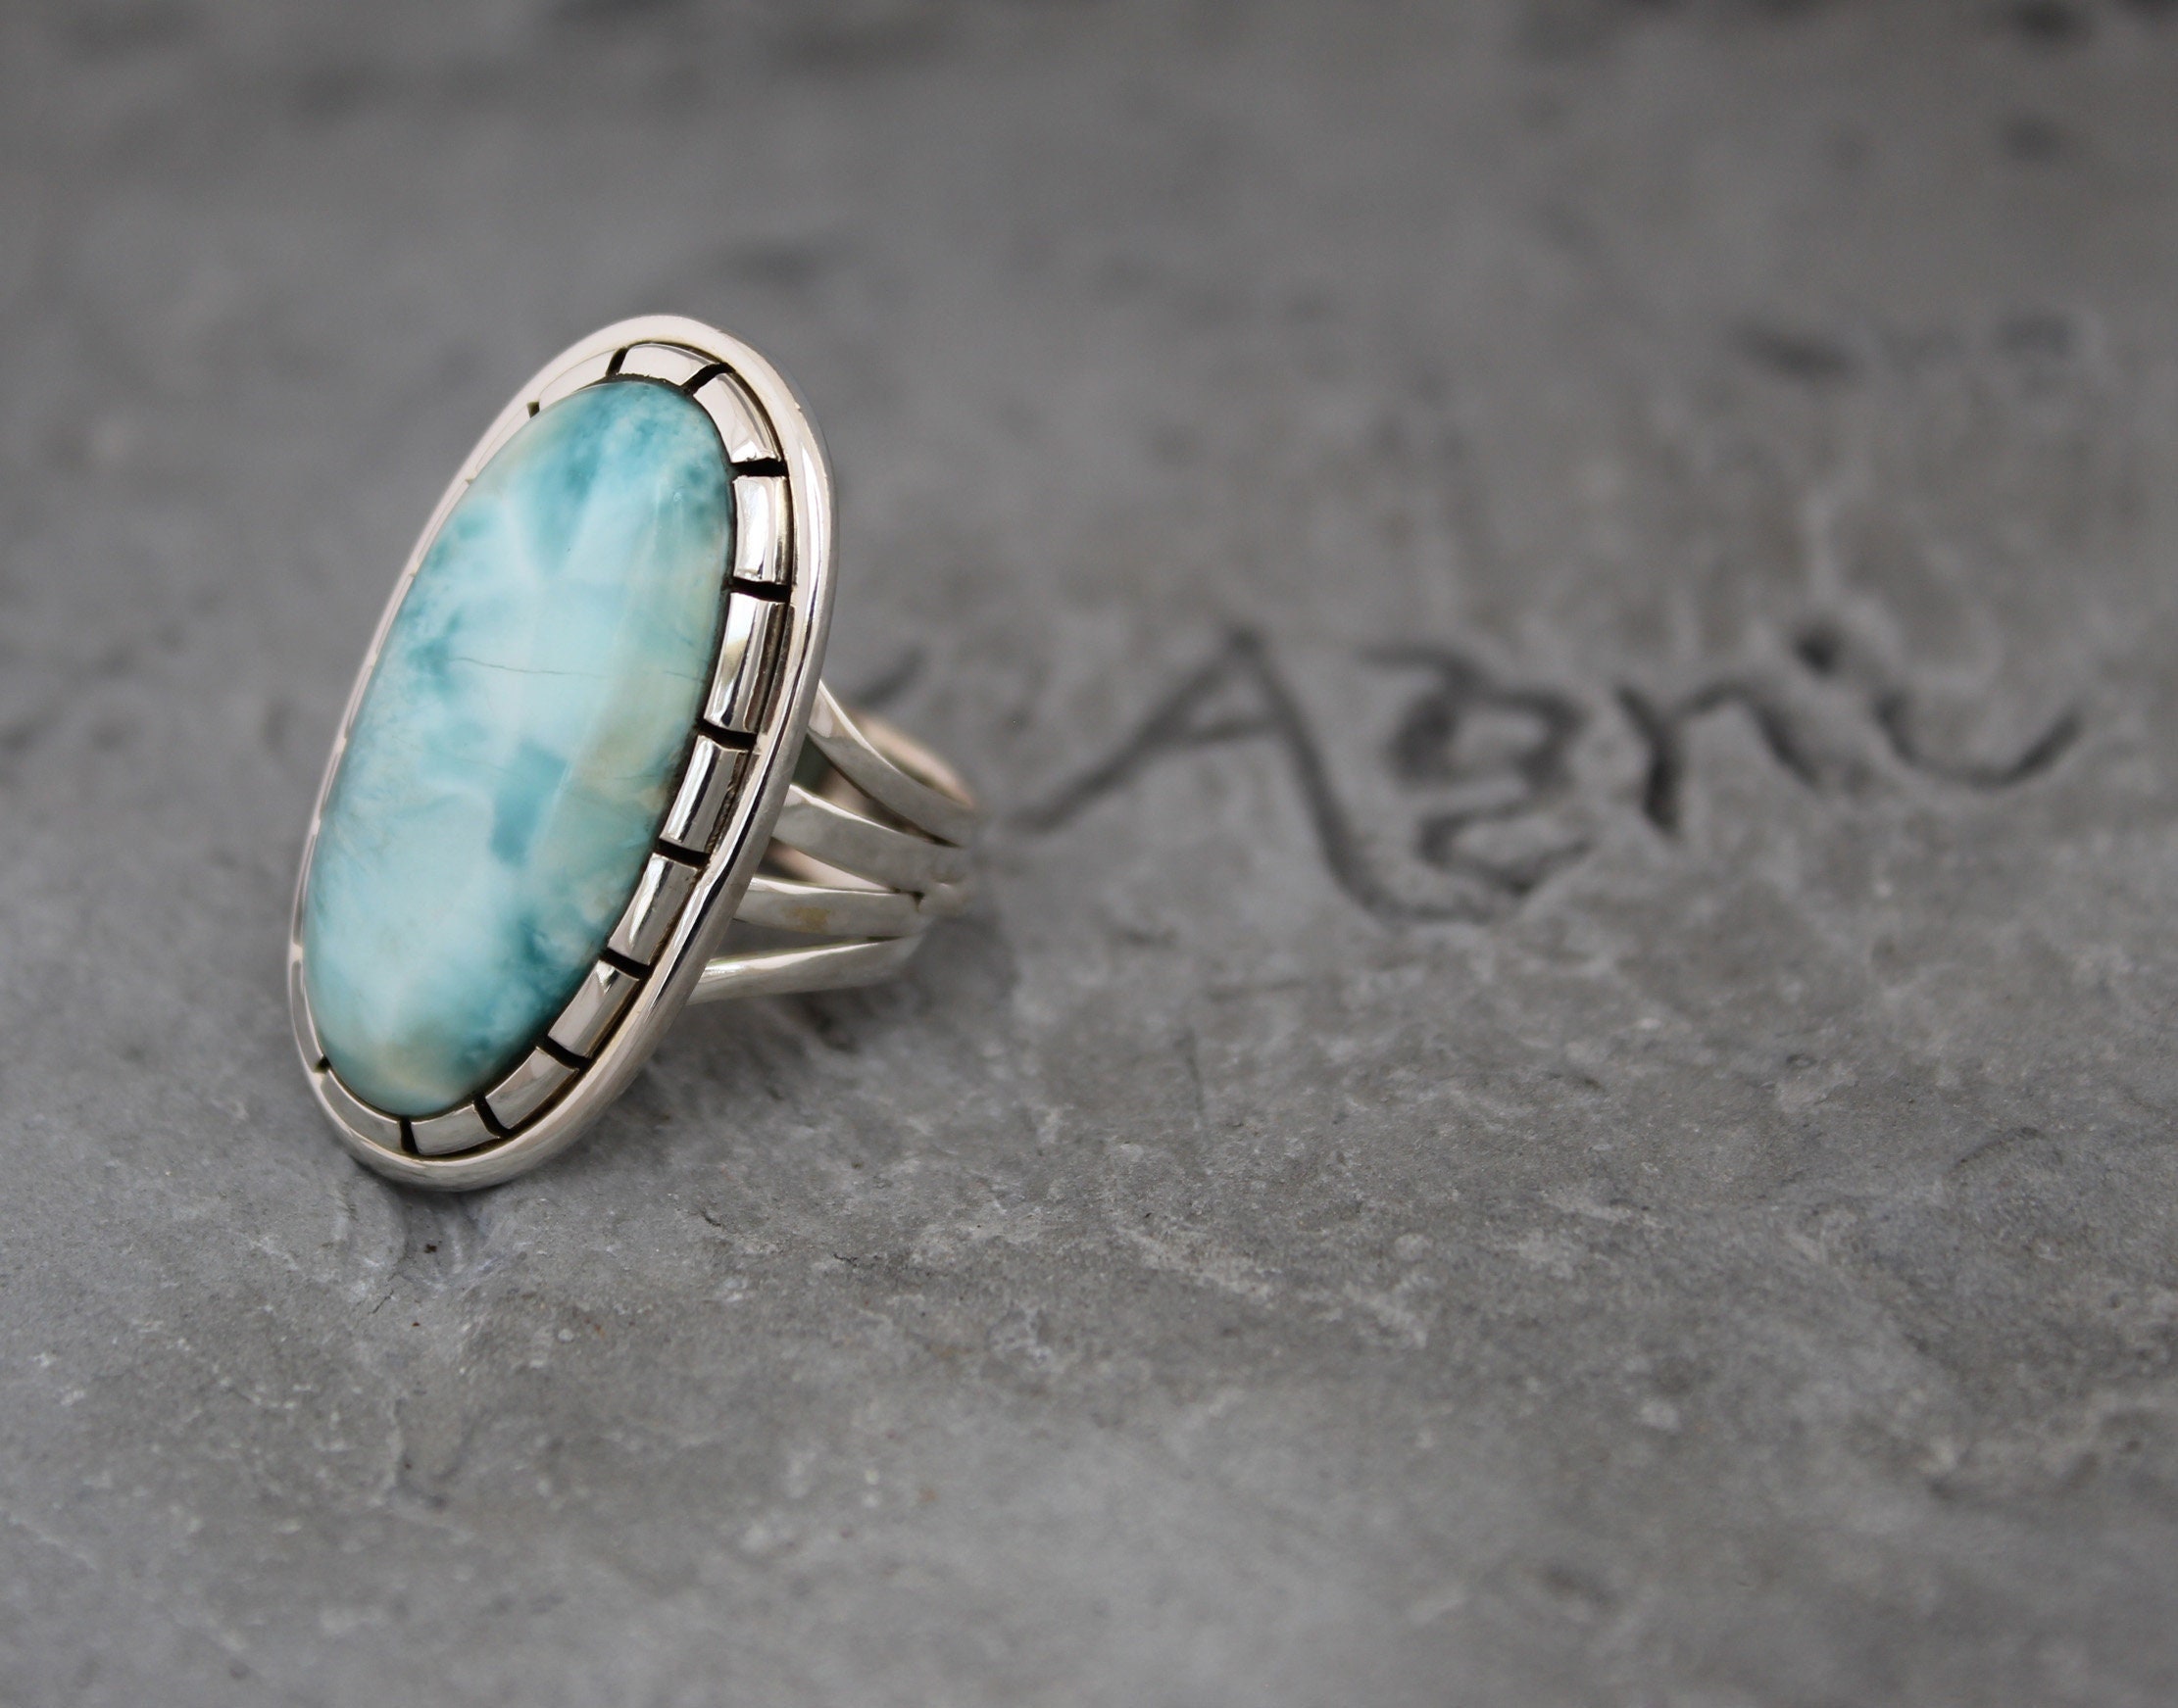 Details about   Natural Larimar Sterling Silver Handmade Ring Healing Gemstone Ring for Mother 